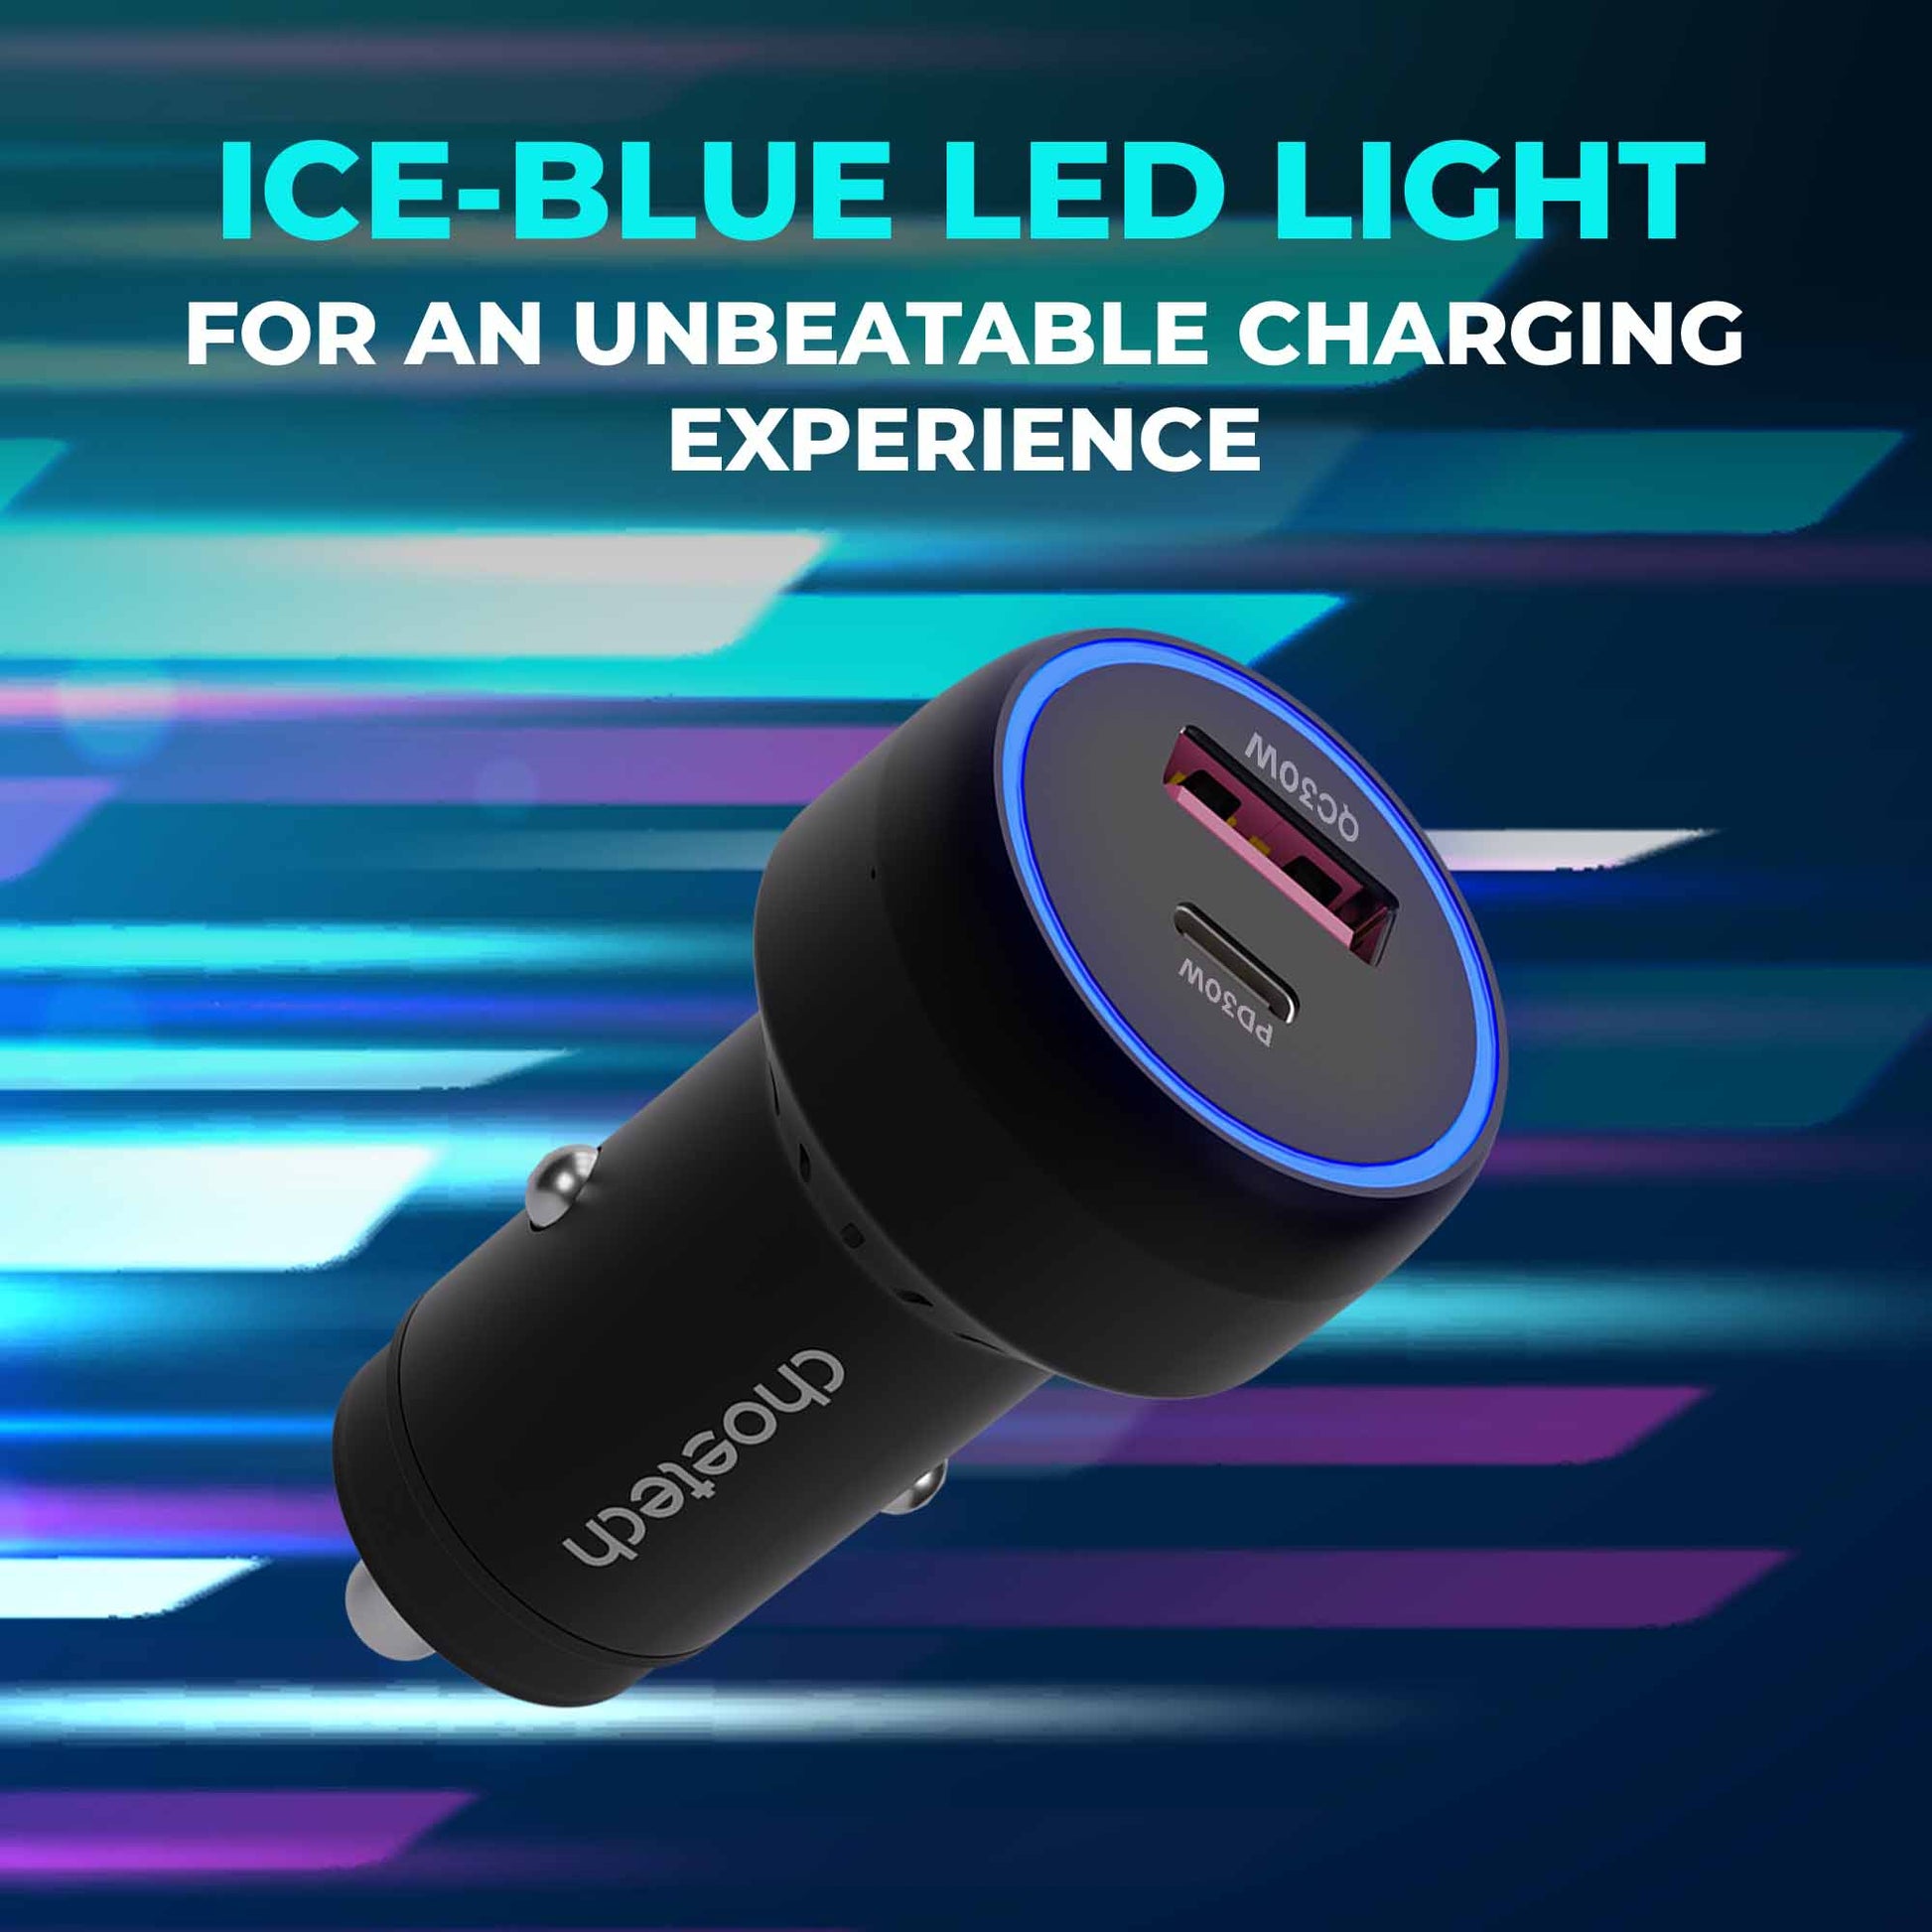 Choetech 60W USB Type-C/A Metal Body Mobile Car Charger, TC0014 |__ICE-BLUE.LED LIGHT FOR AN UNBEATABLE CHARGING | : EXPERIENCE |